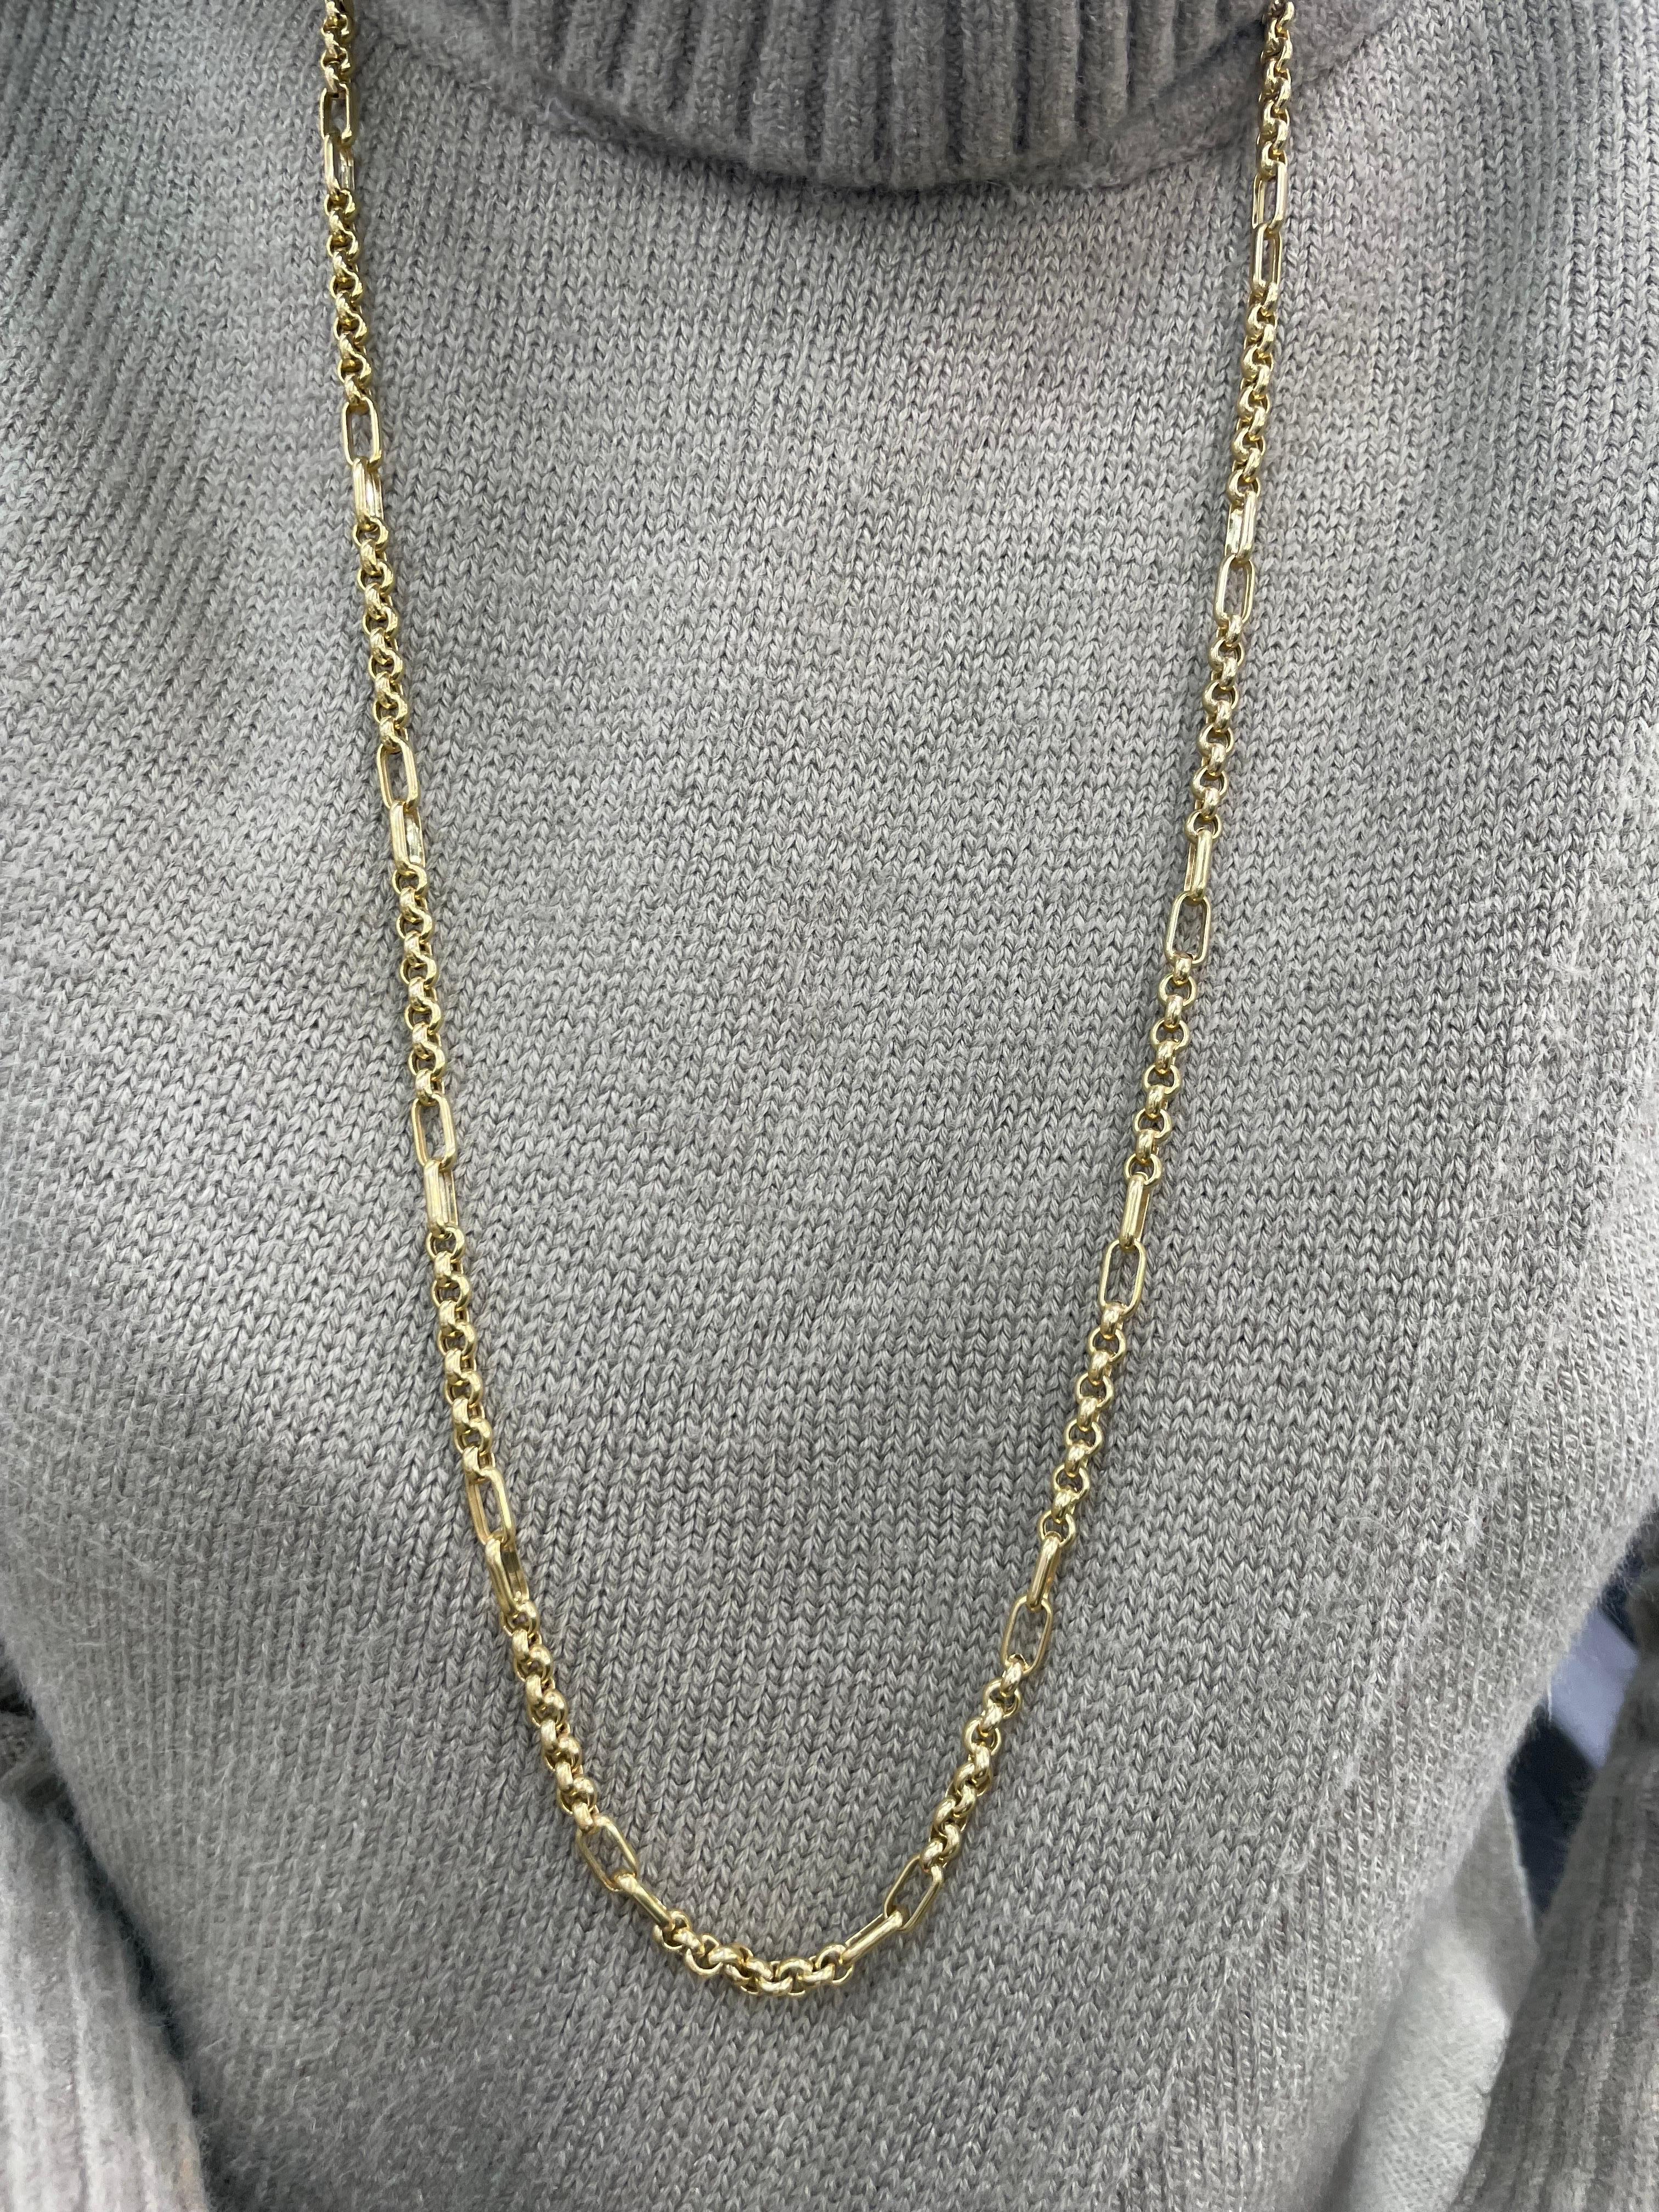 14 Karat Yellow Gold Link Necklace 25.6 Grams 36.5 Inches For Sale 4